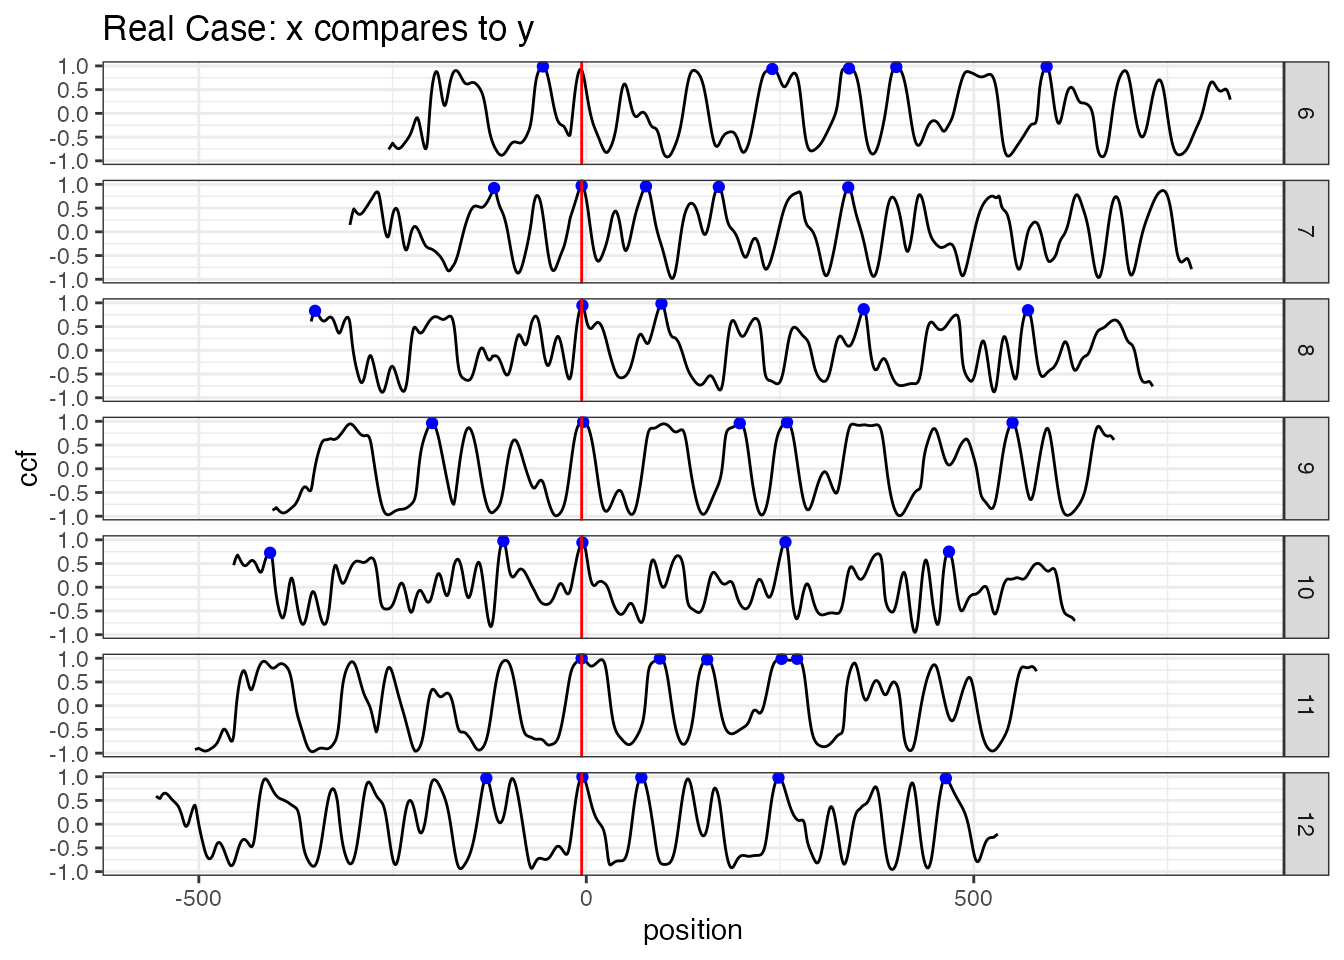 real case: compare x to y. The 5 highest peaks are marked by the blue dots